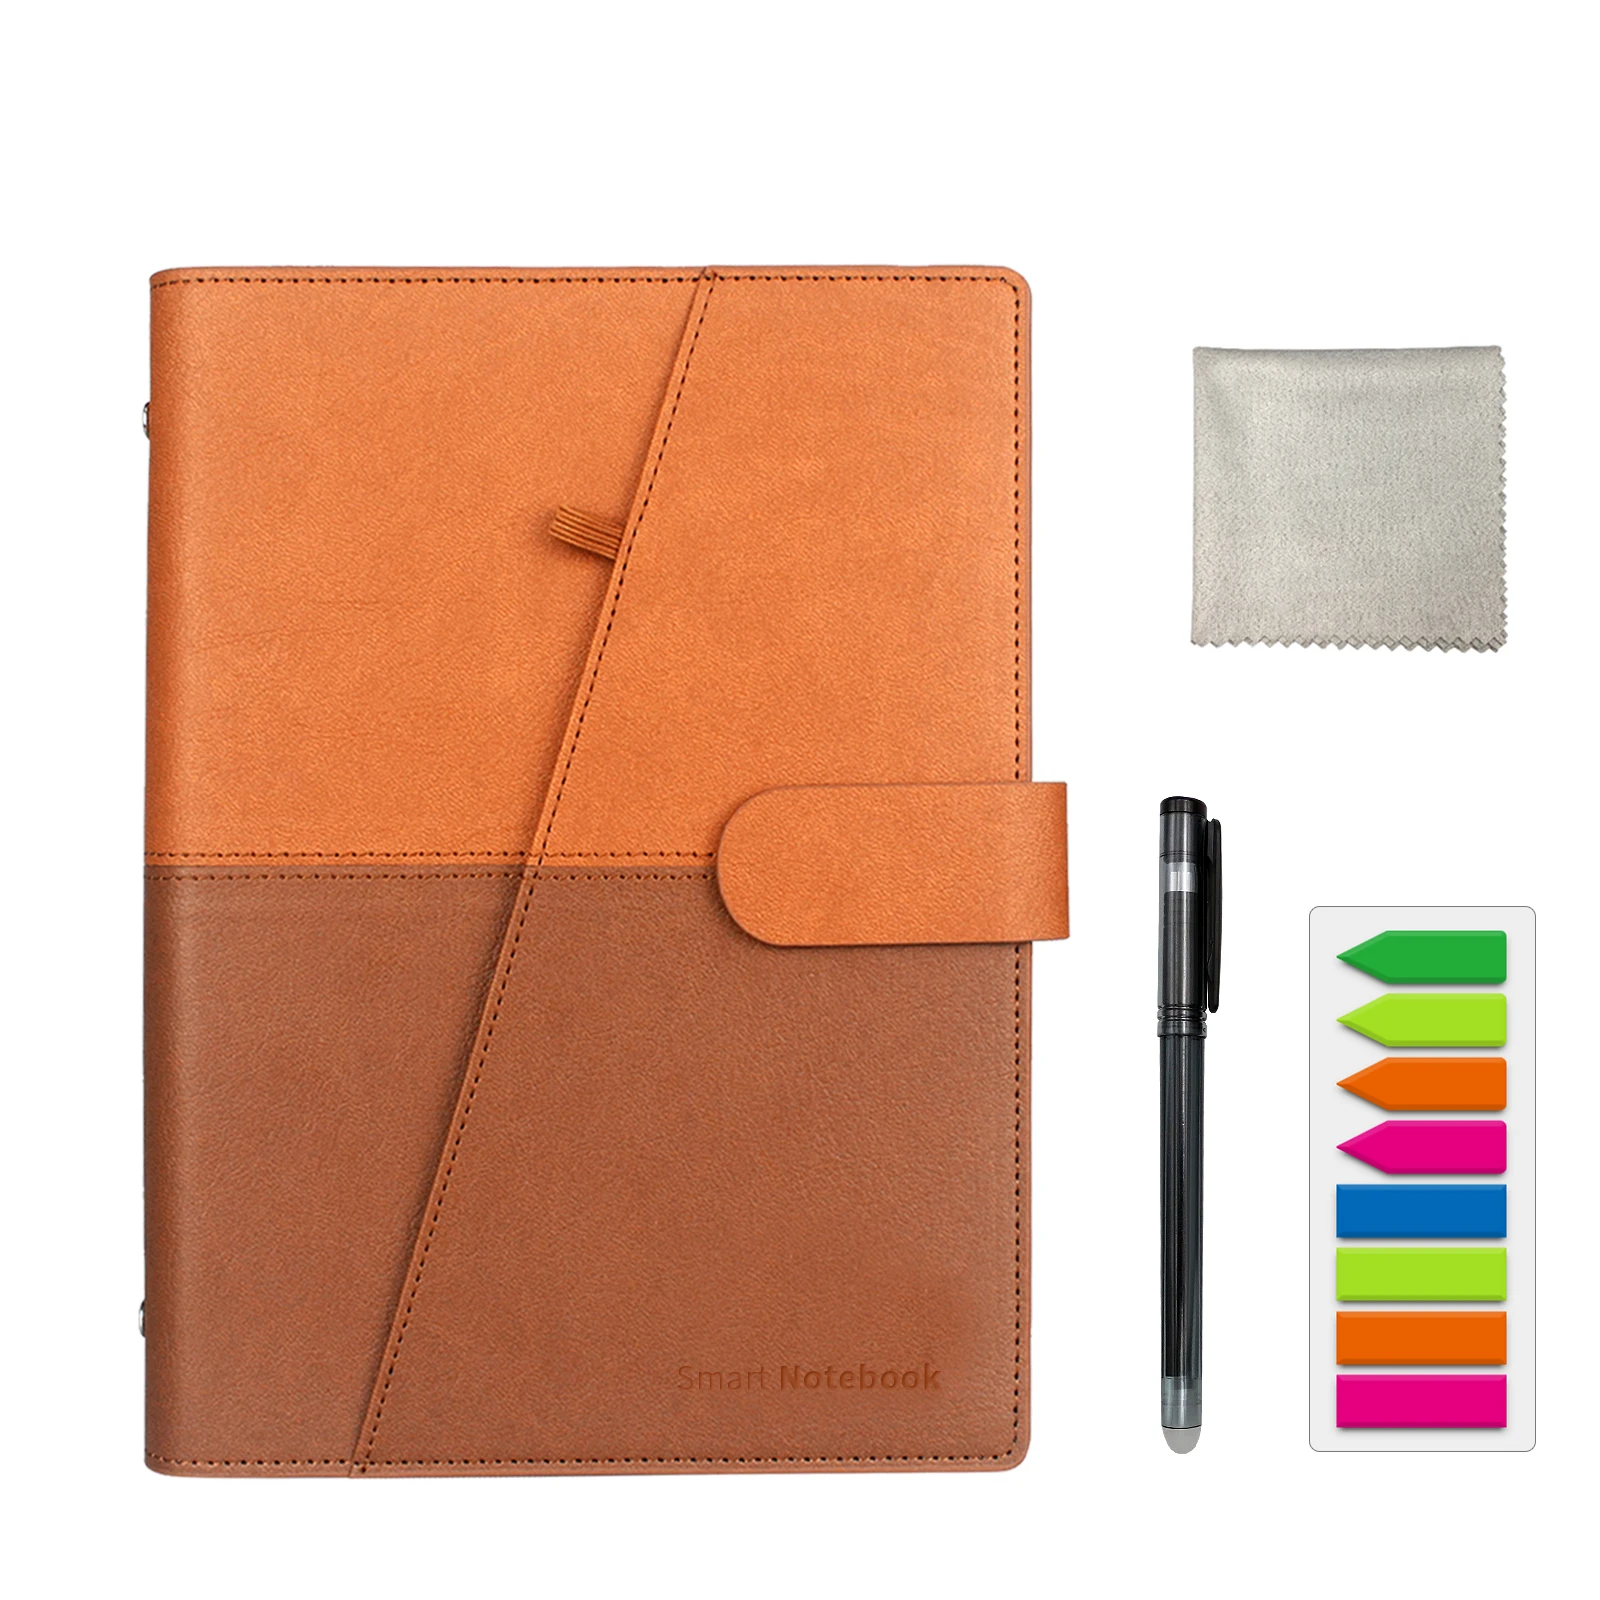 Paper Leather Reusable Smart Notebook